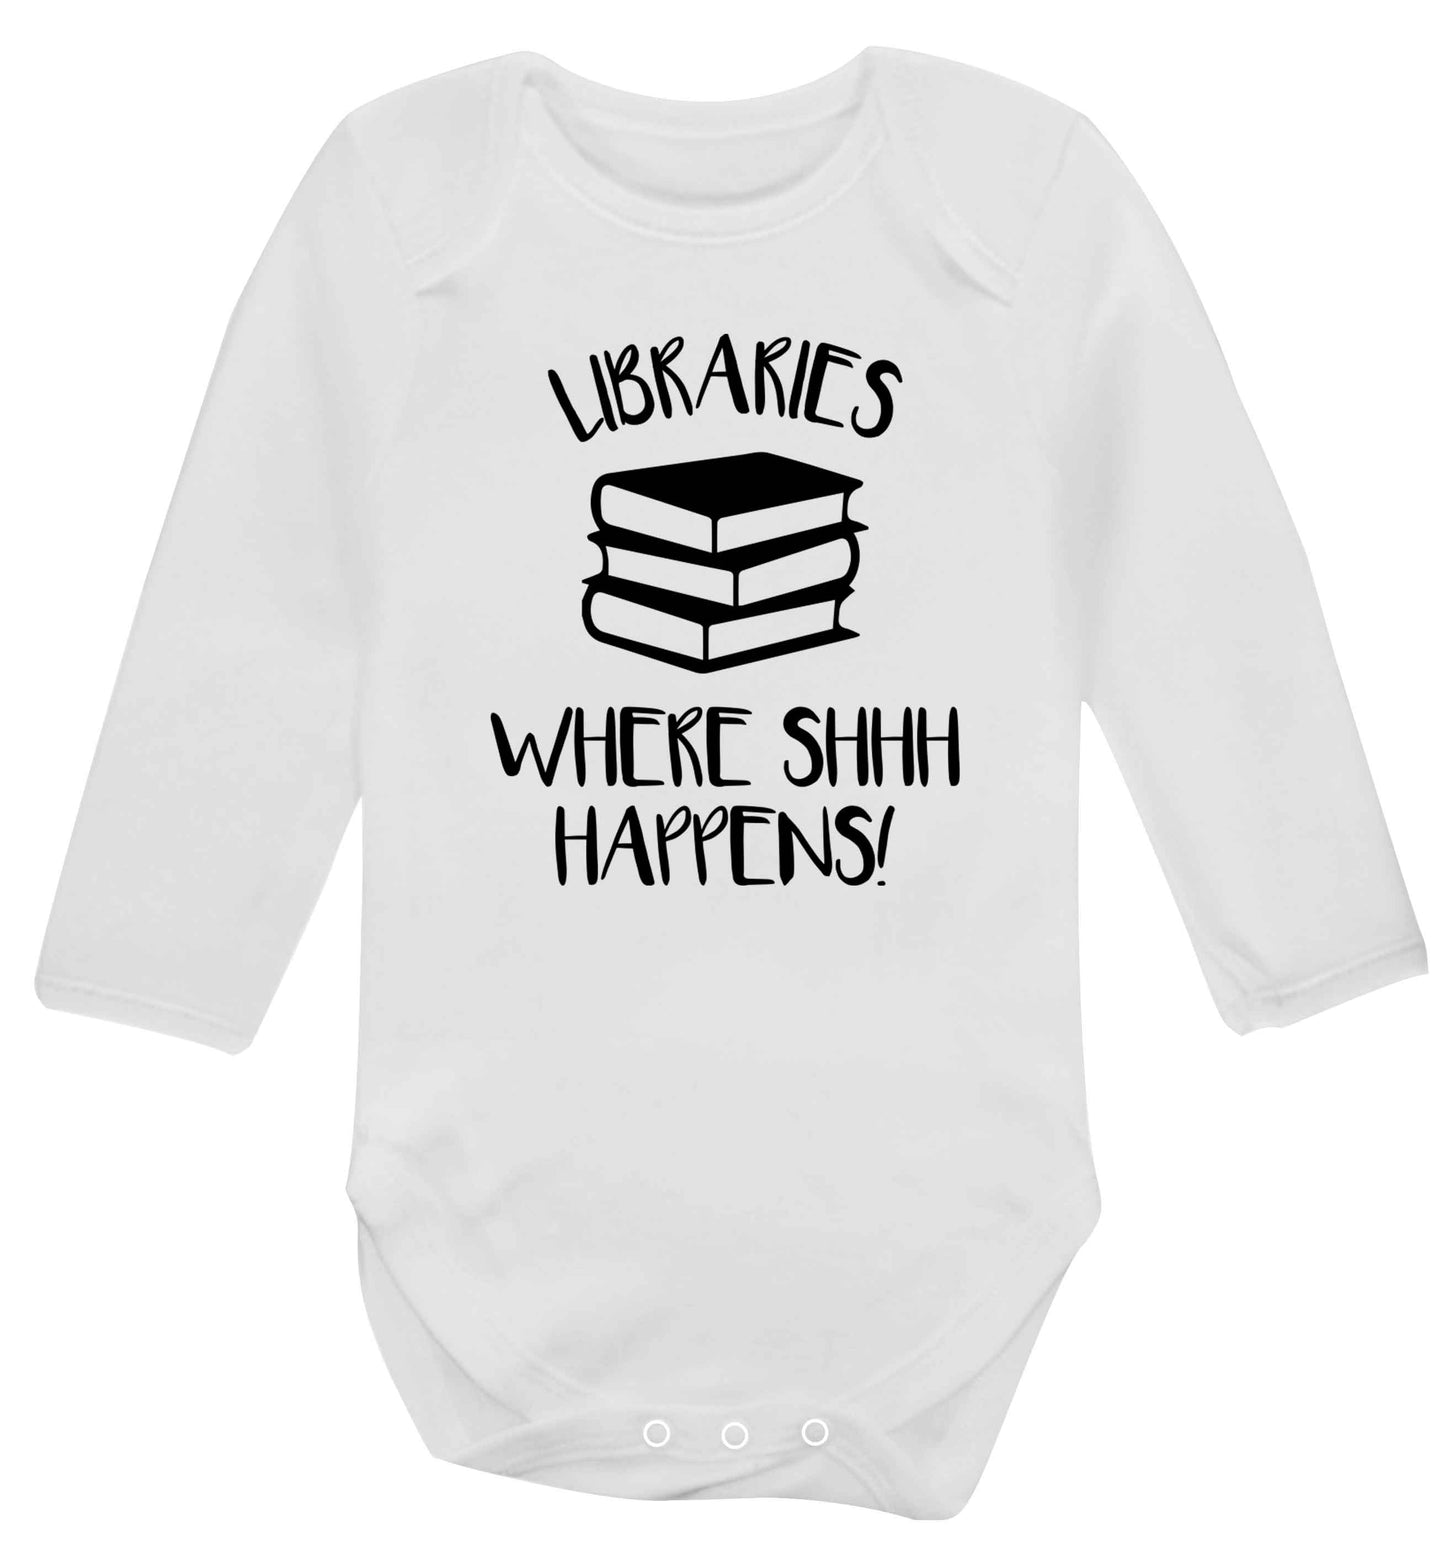 Libraries where shh happens! Baby Vest long sleeved white 6-12 months